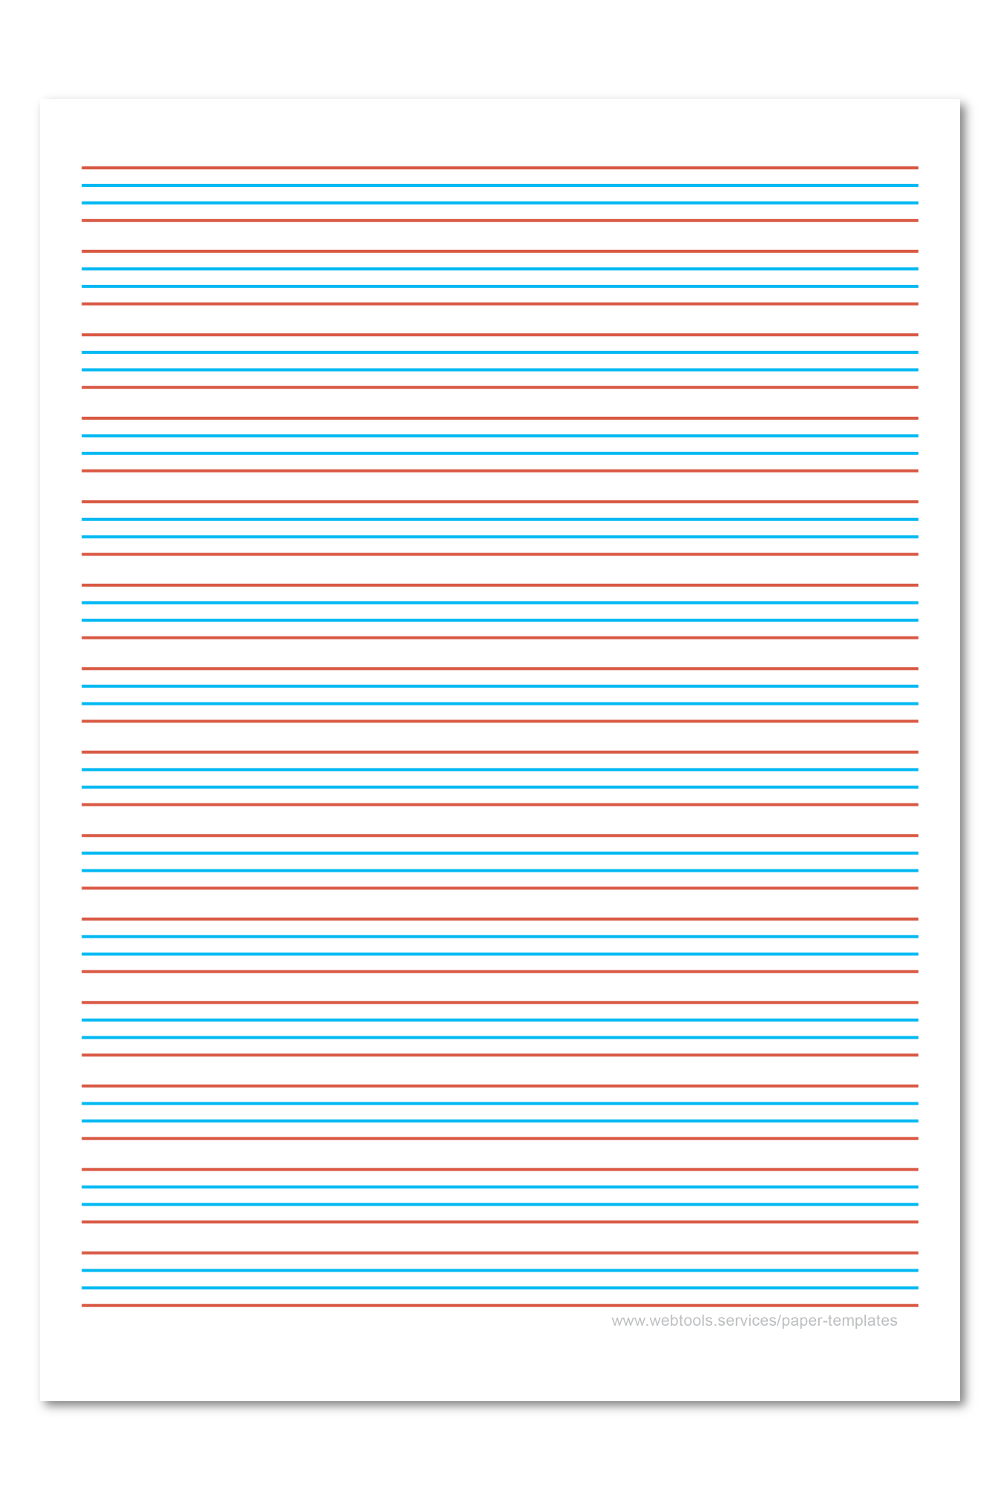 Wide Ruled Line Dot Paper: Notebook With Dotted Lines. Large Size